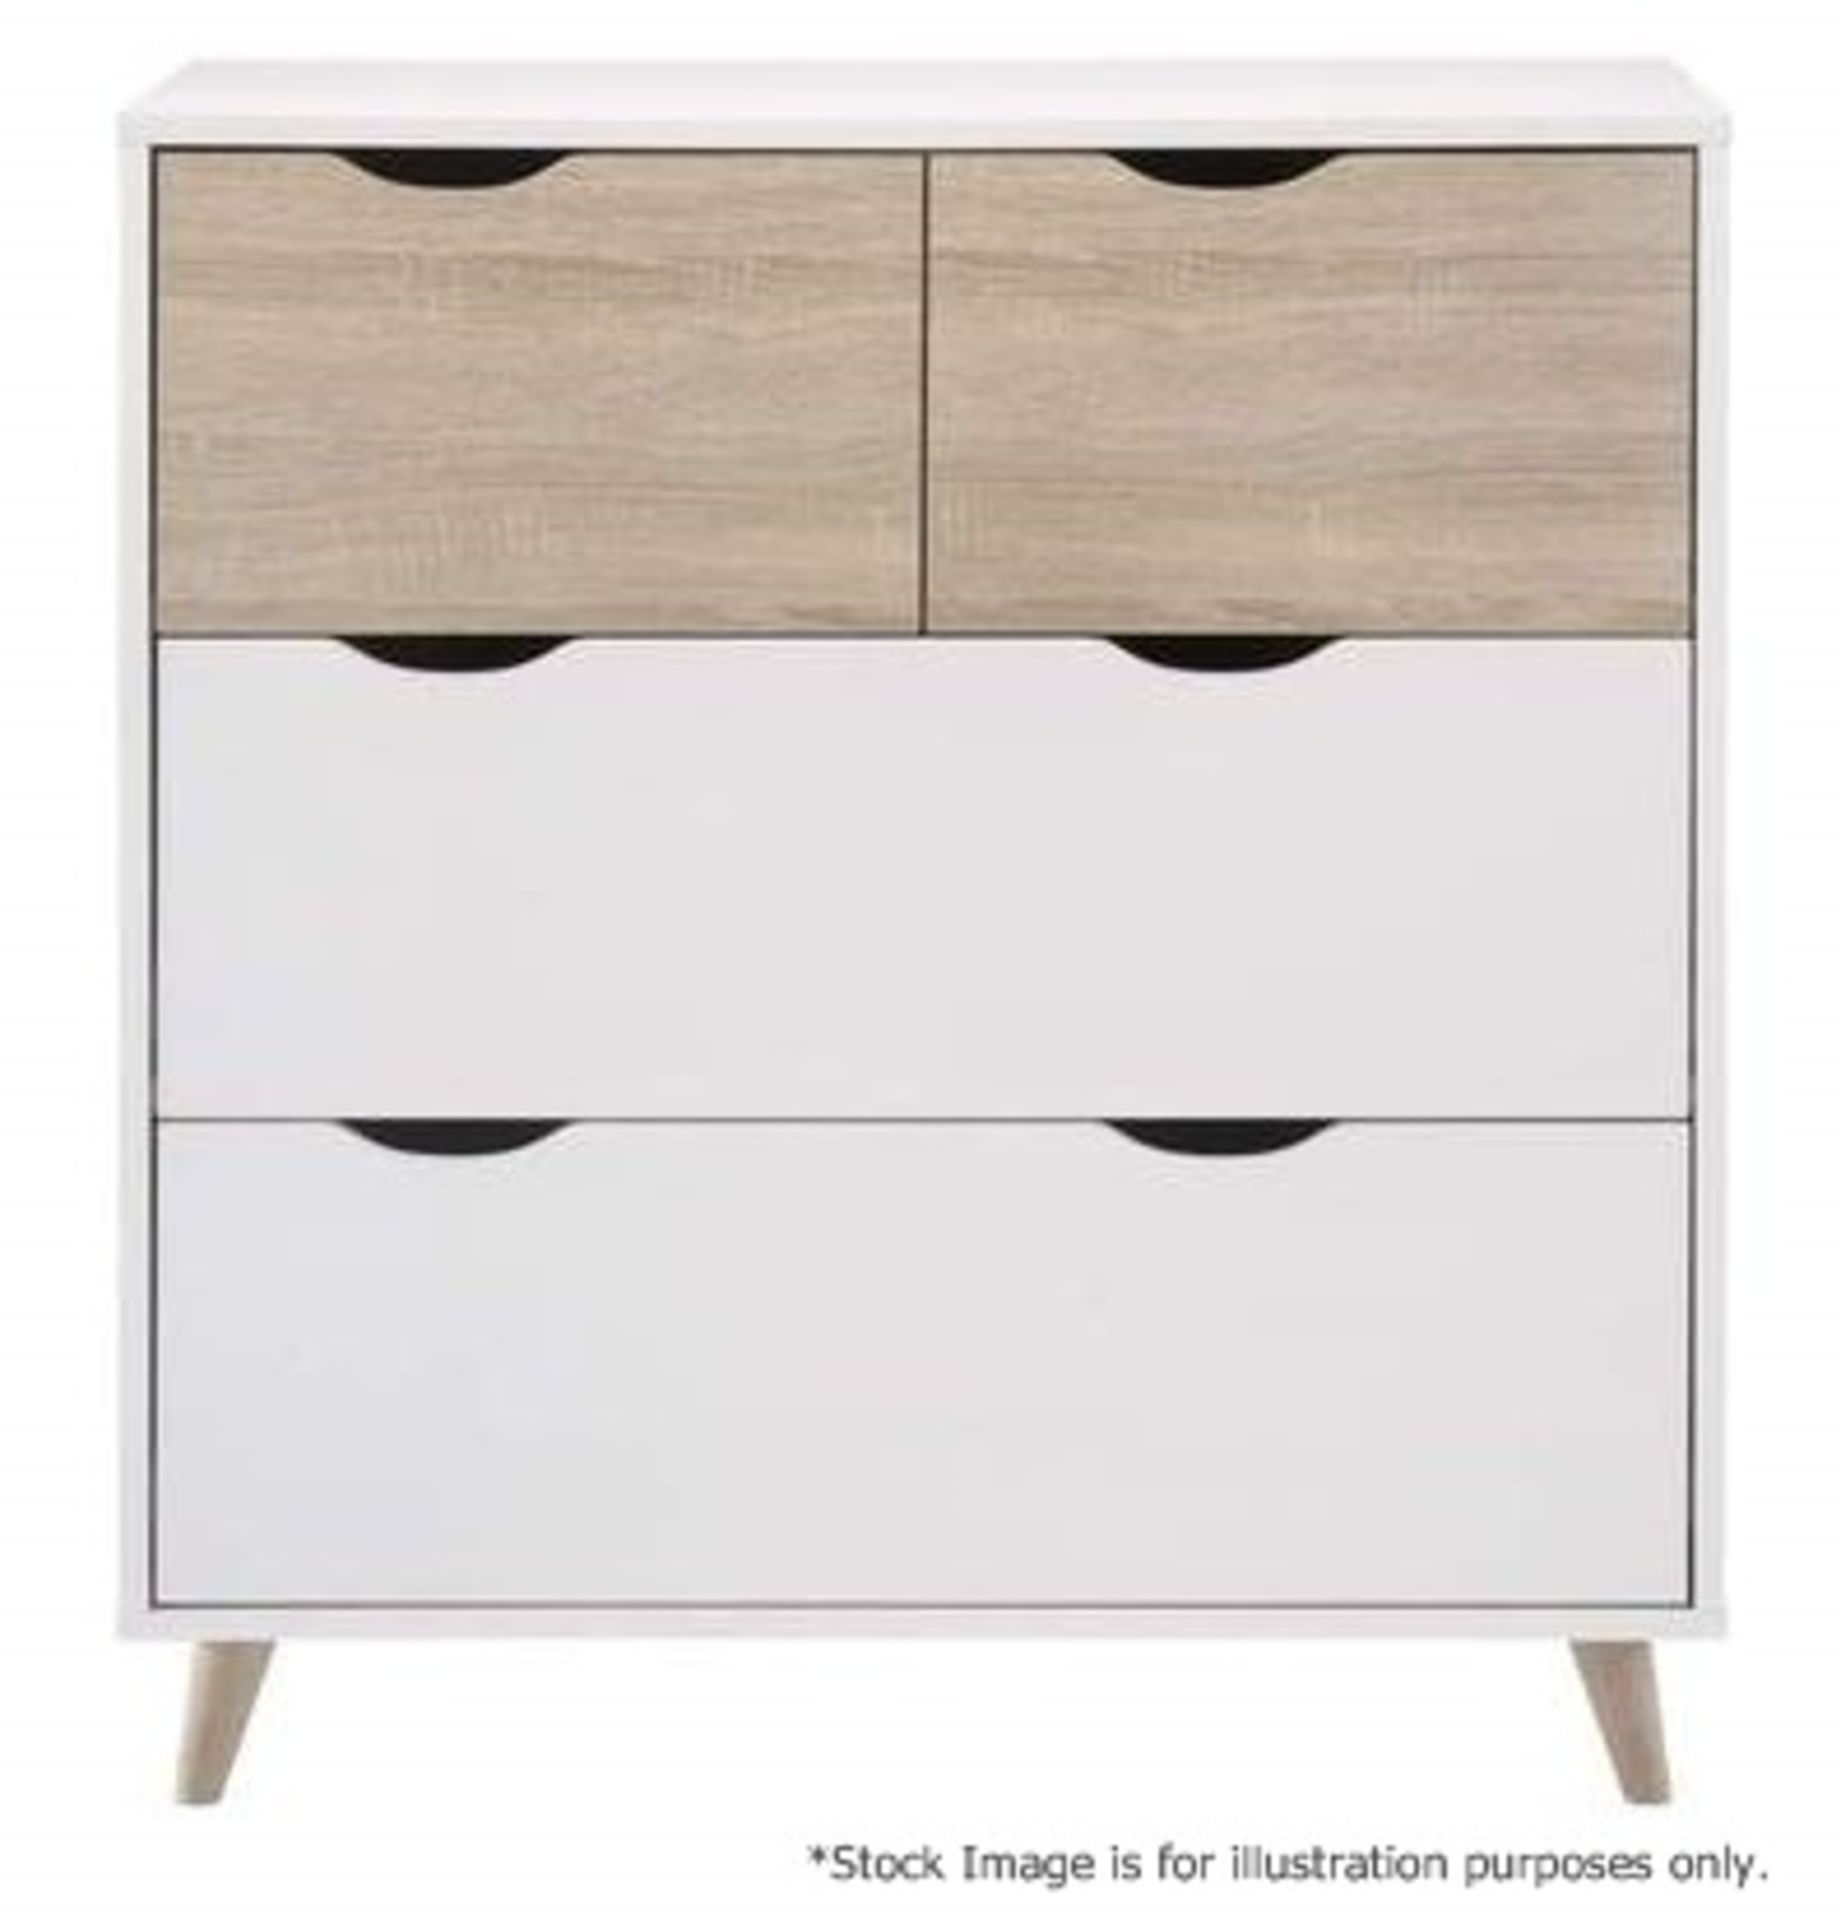 1 x 'Stockholm' Scandinavian Style Chest Of Drawers - Dimensions: 82 x 90 x 39cm - Brand New Boxed - Image 2 of 5